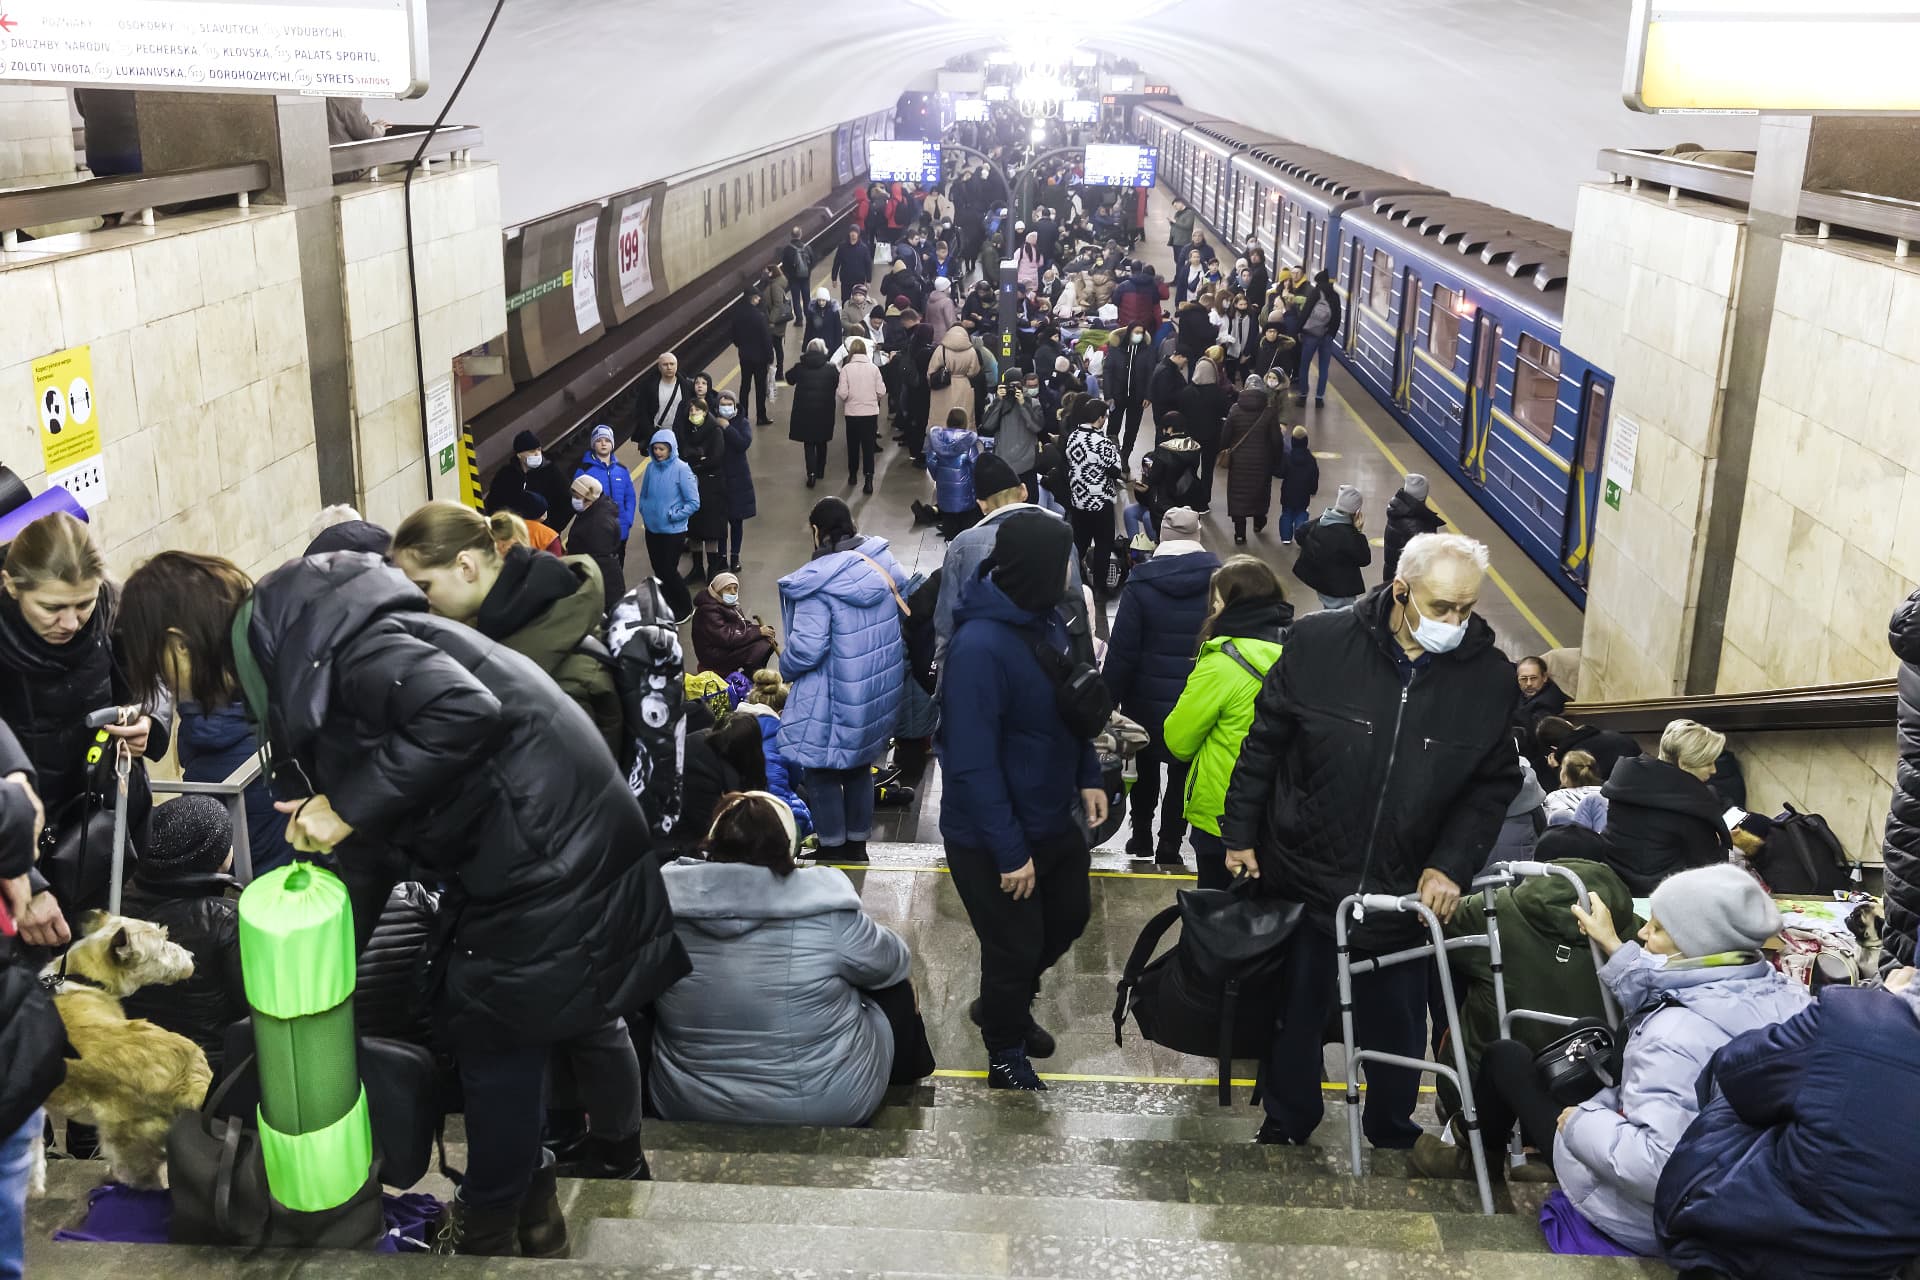 Subway station serves as a shelter for thousands of people during a rocket and bomb attack